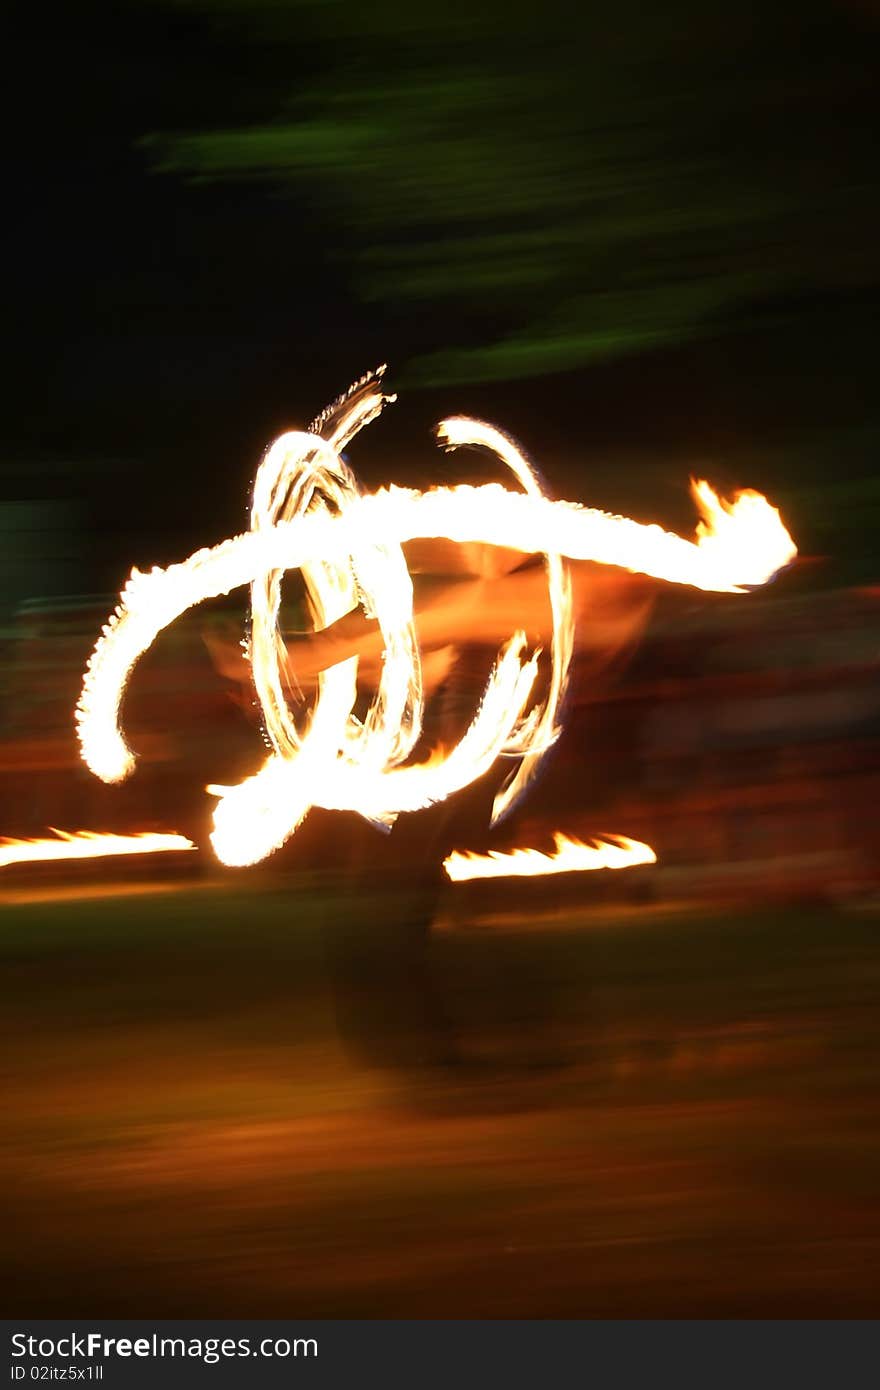 Fire dancer at night, in front of blured background. Fire dancer at night, in front of blured background.